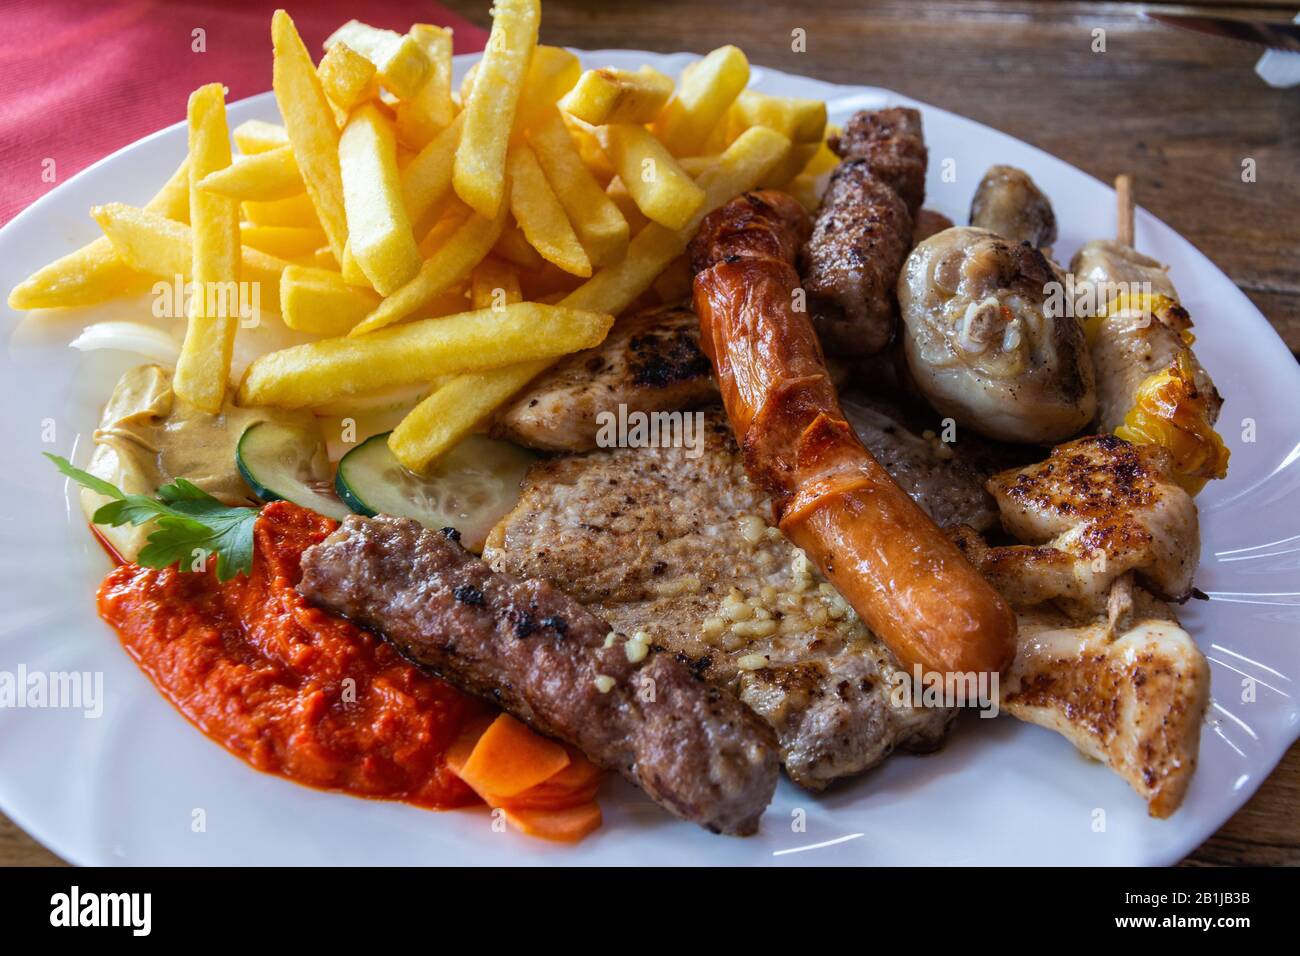 Mixed grill platter with grilled meat and sausages in Slovenia. Stock Photo